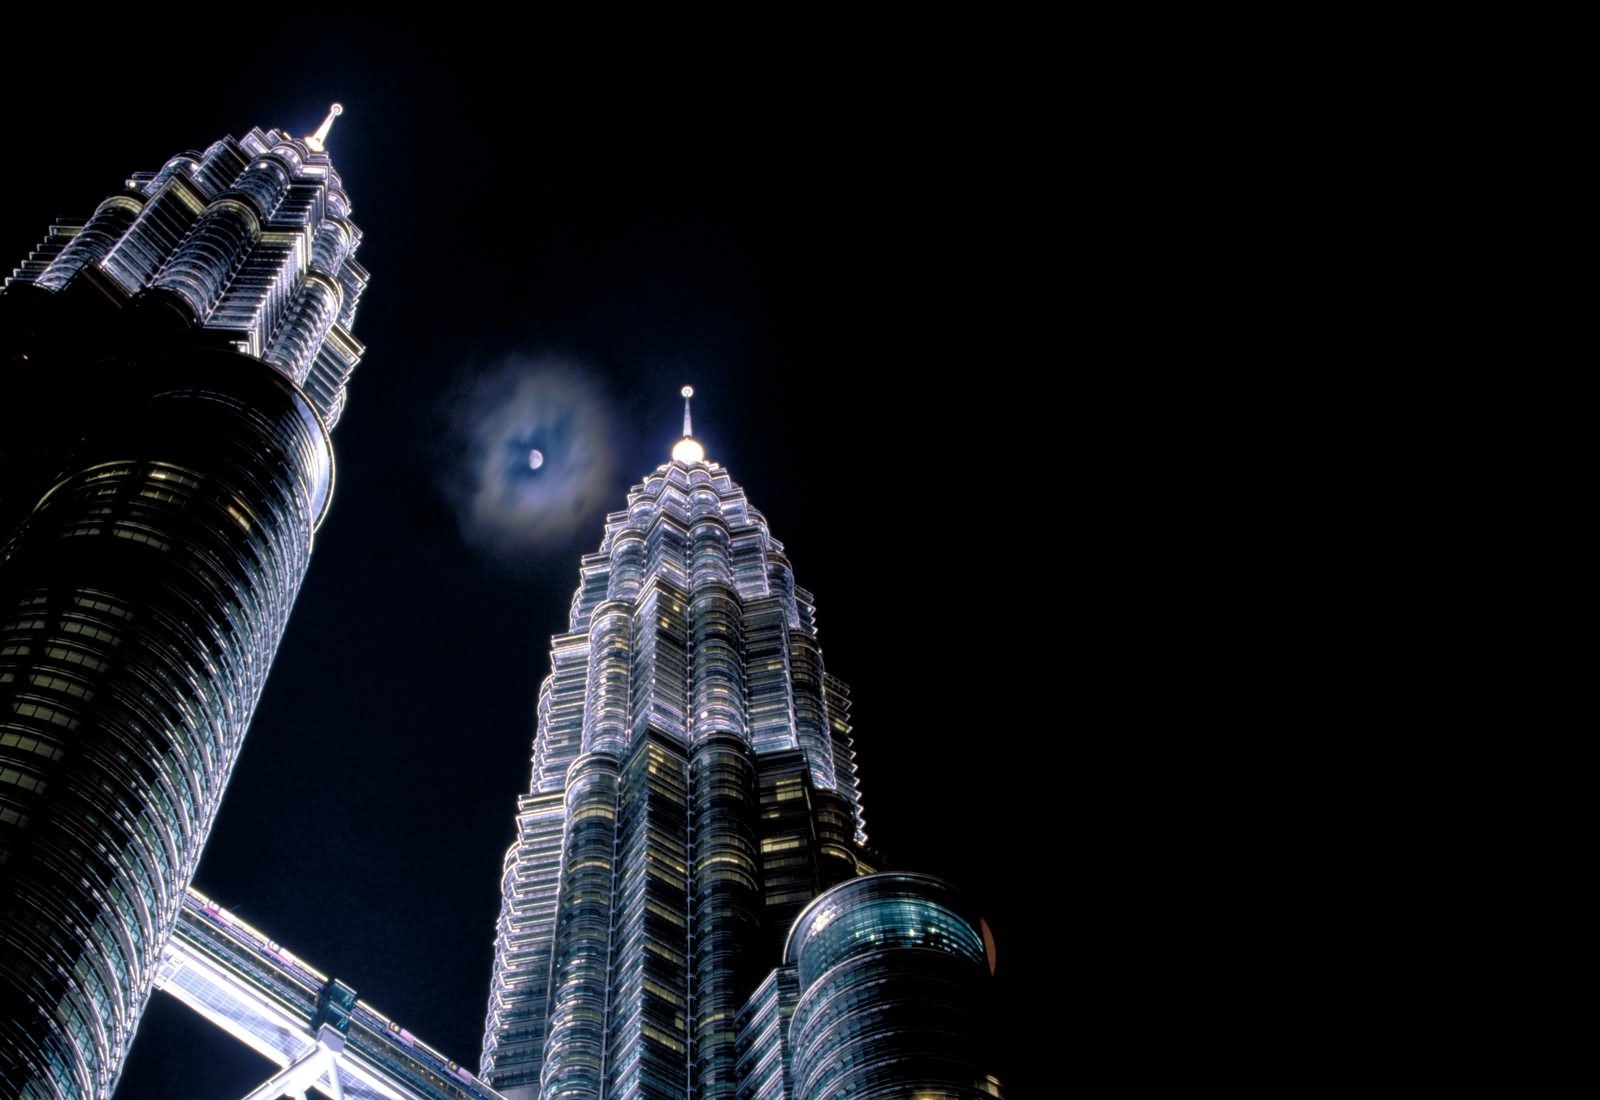 Amazing Picture Of Petronas Towers At Night